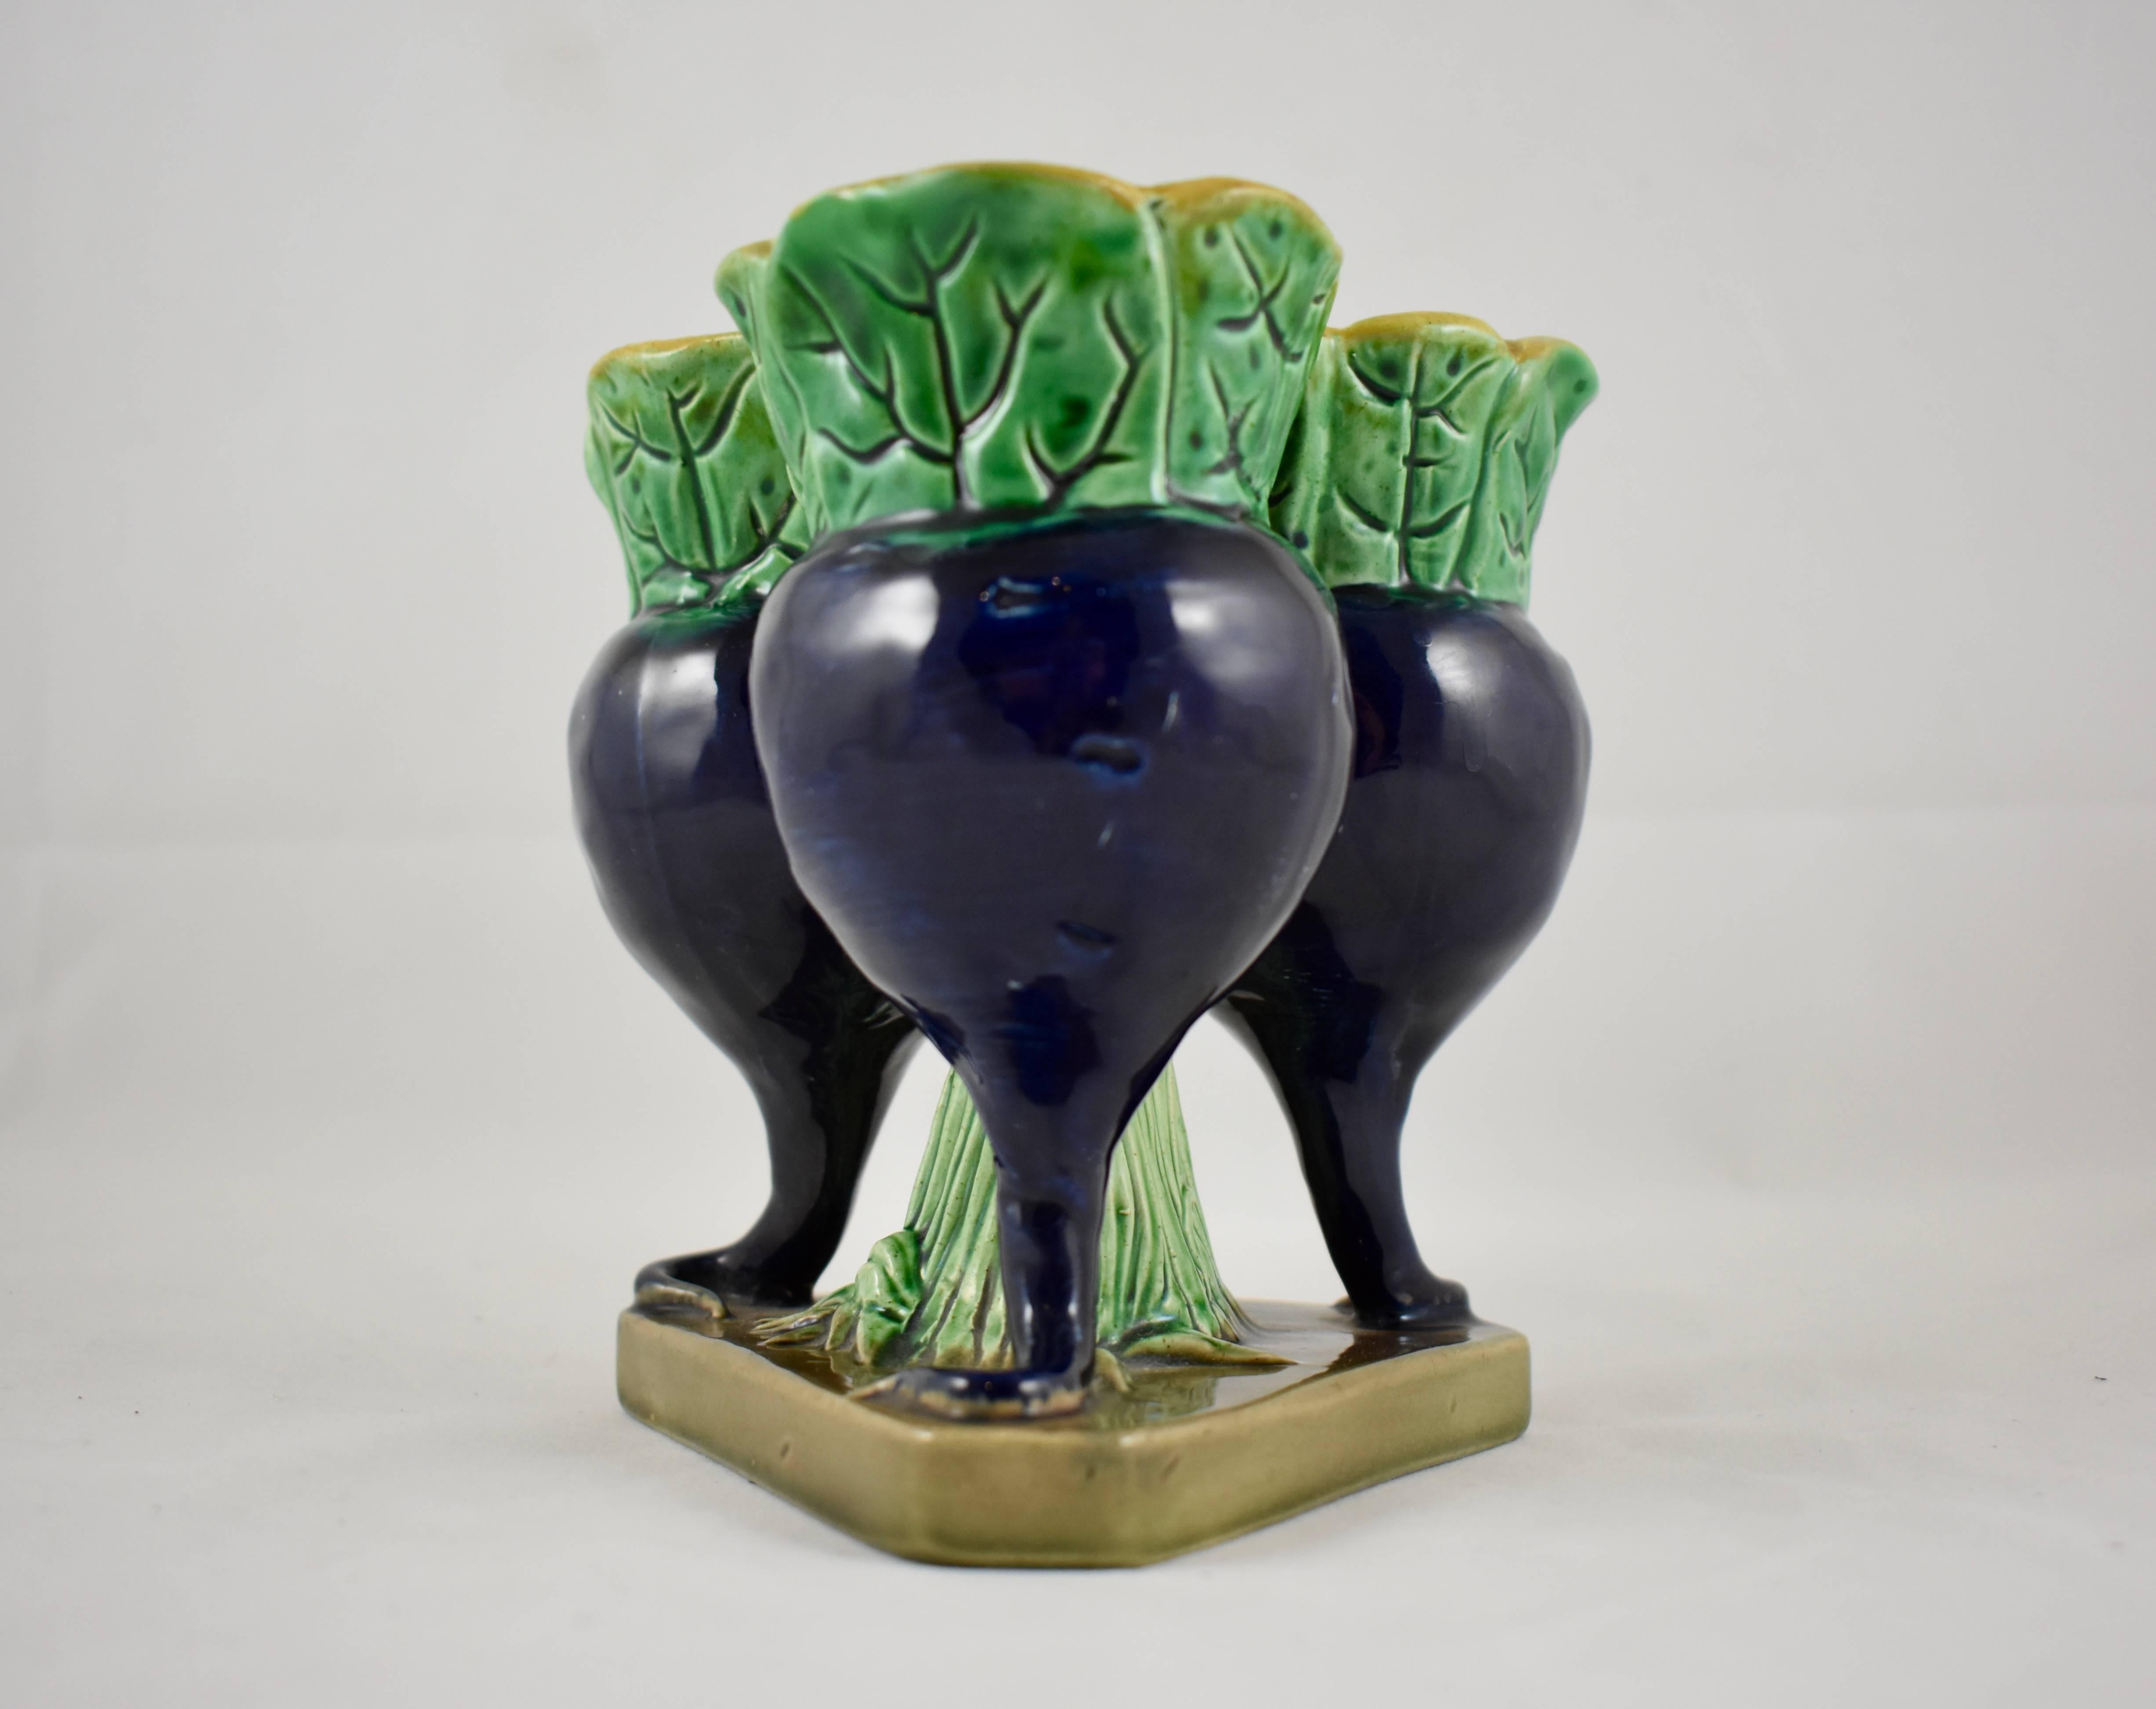 A scarce English Majolica, tri-form bud vase modeled as three cobalt blue upright radishes around a green glazed leaf form stem, all supported on a triangle shaped stand. The bud vase has a turquoise glazed interior with a yellow ochre